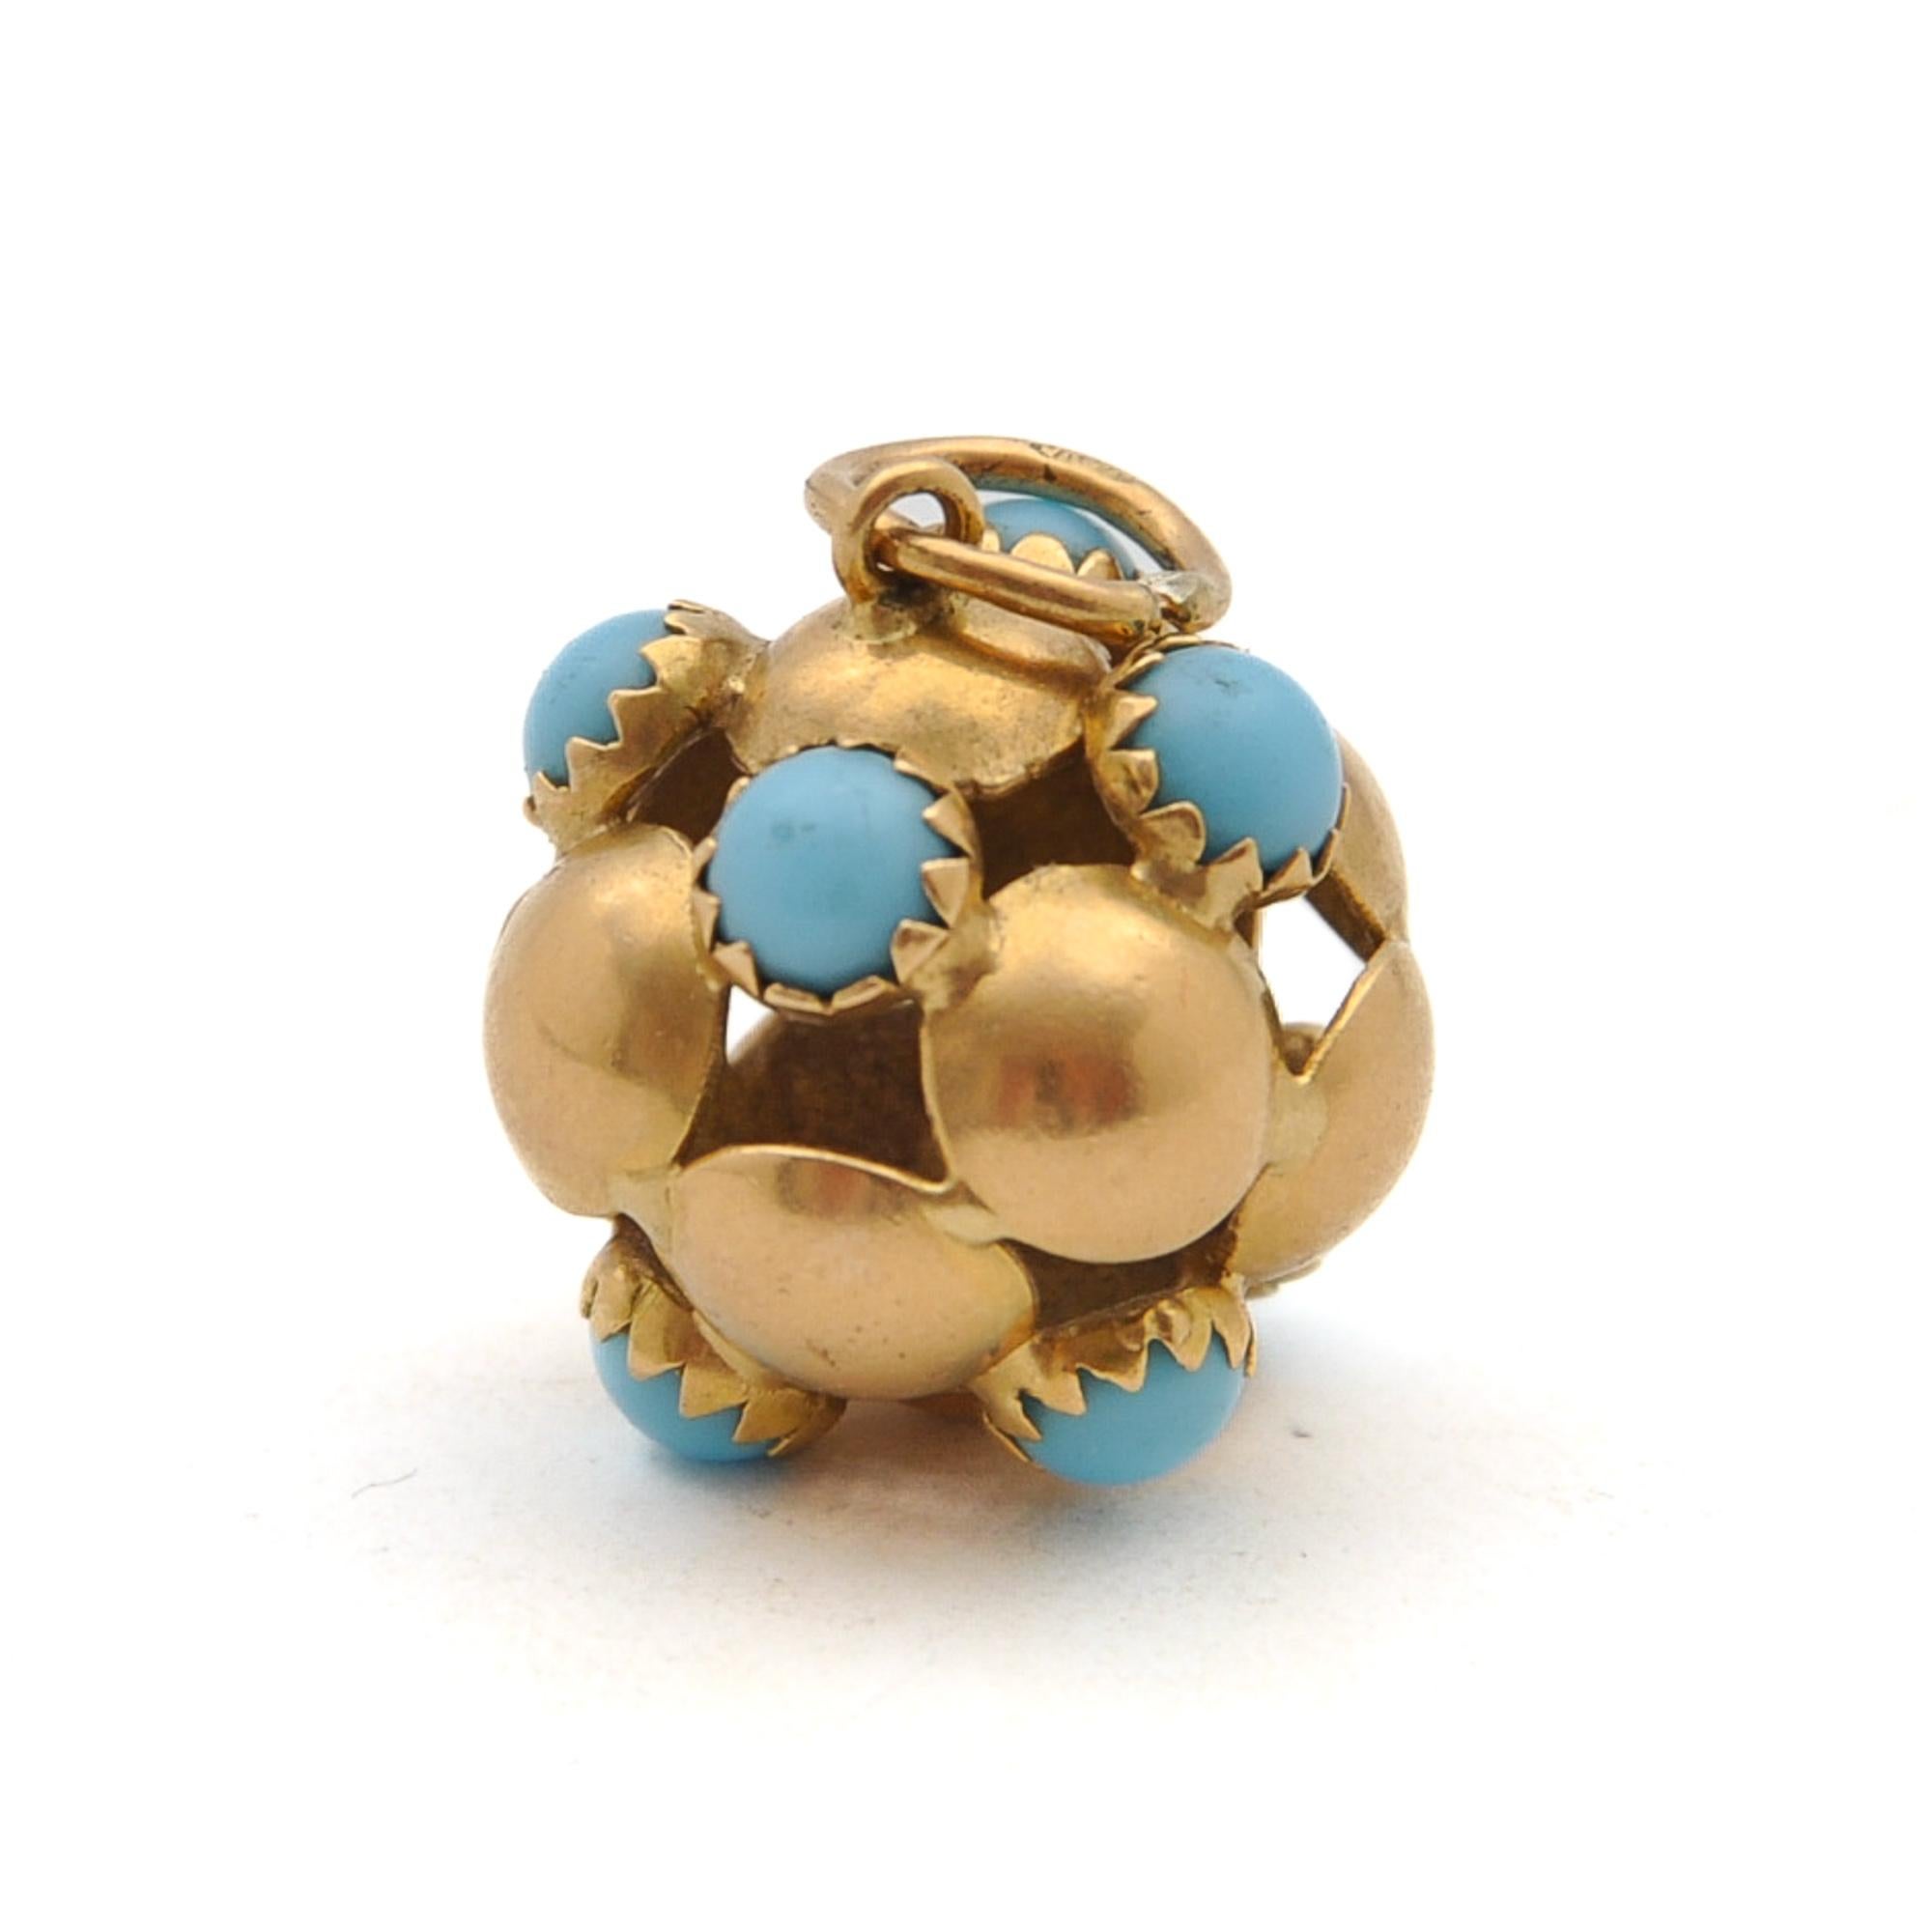 Vintage 18K Gold and Turquoise Ball Charm Pendant For Sale 5